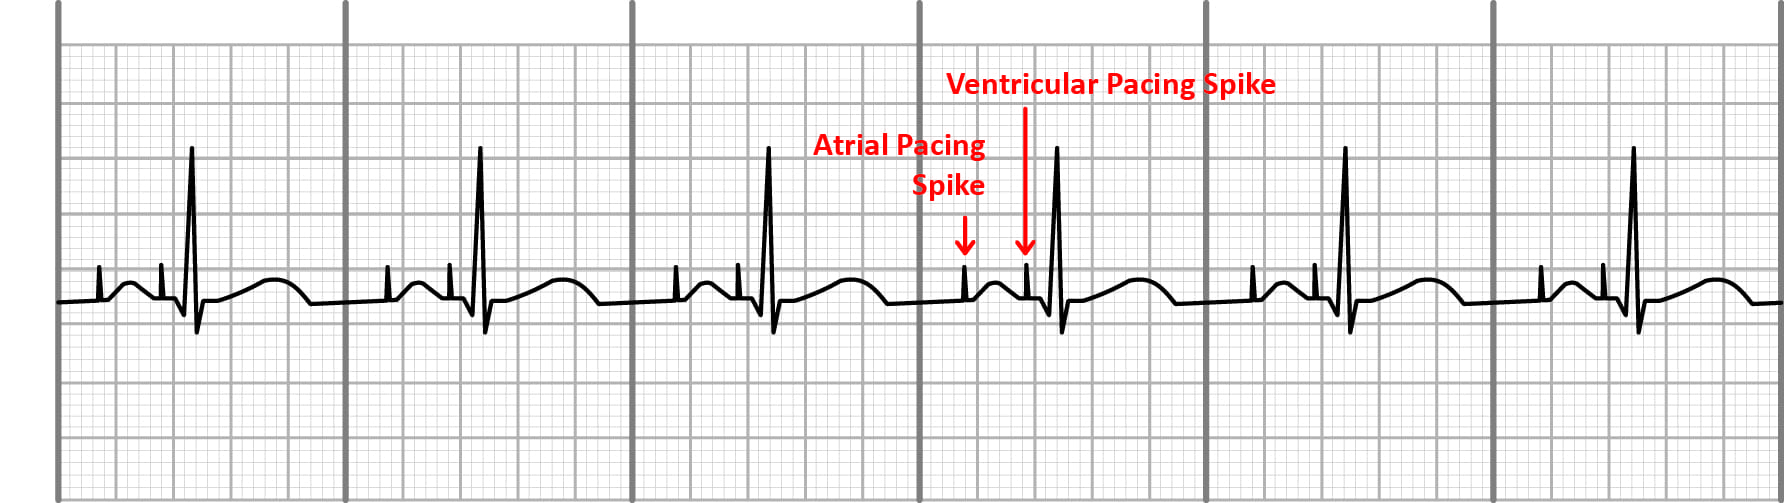 Atrial and ventricular pacing on an EKG